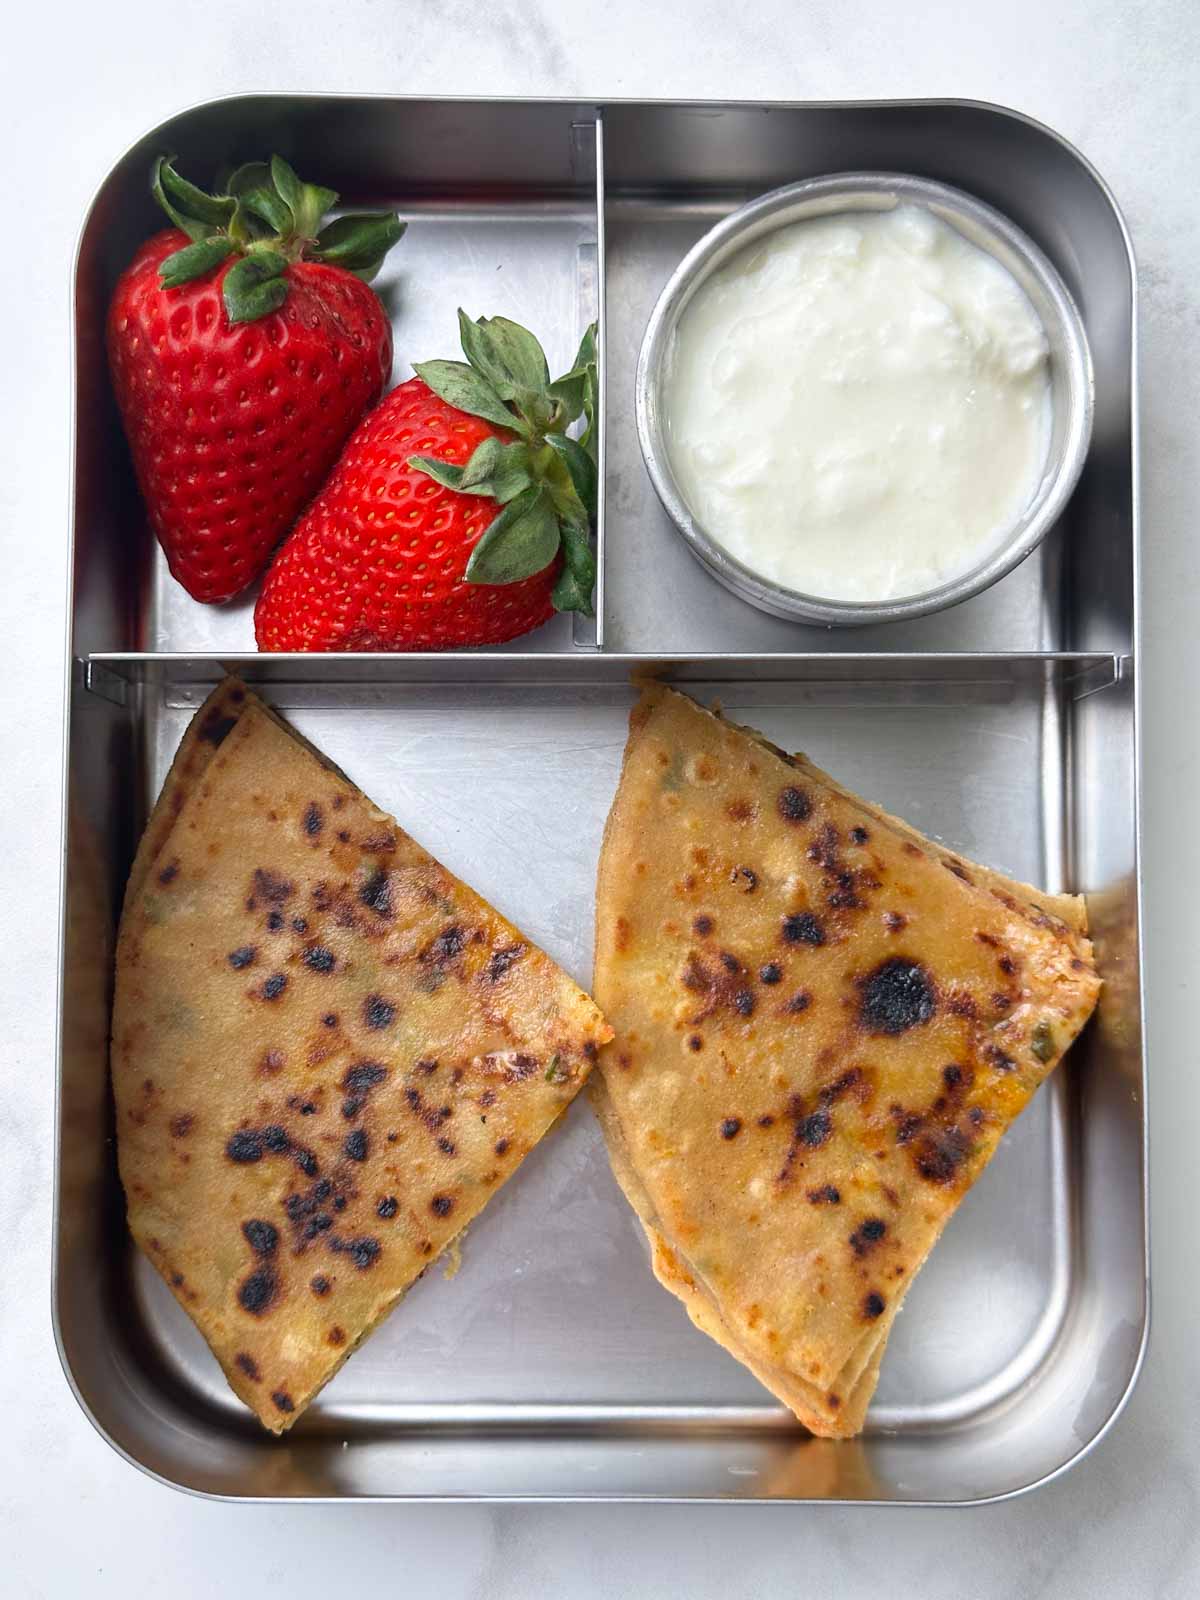 Aloo paratha with yogurt and strawberries in the steel lunch box